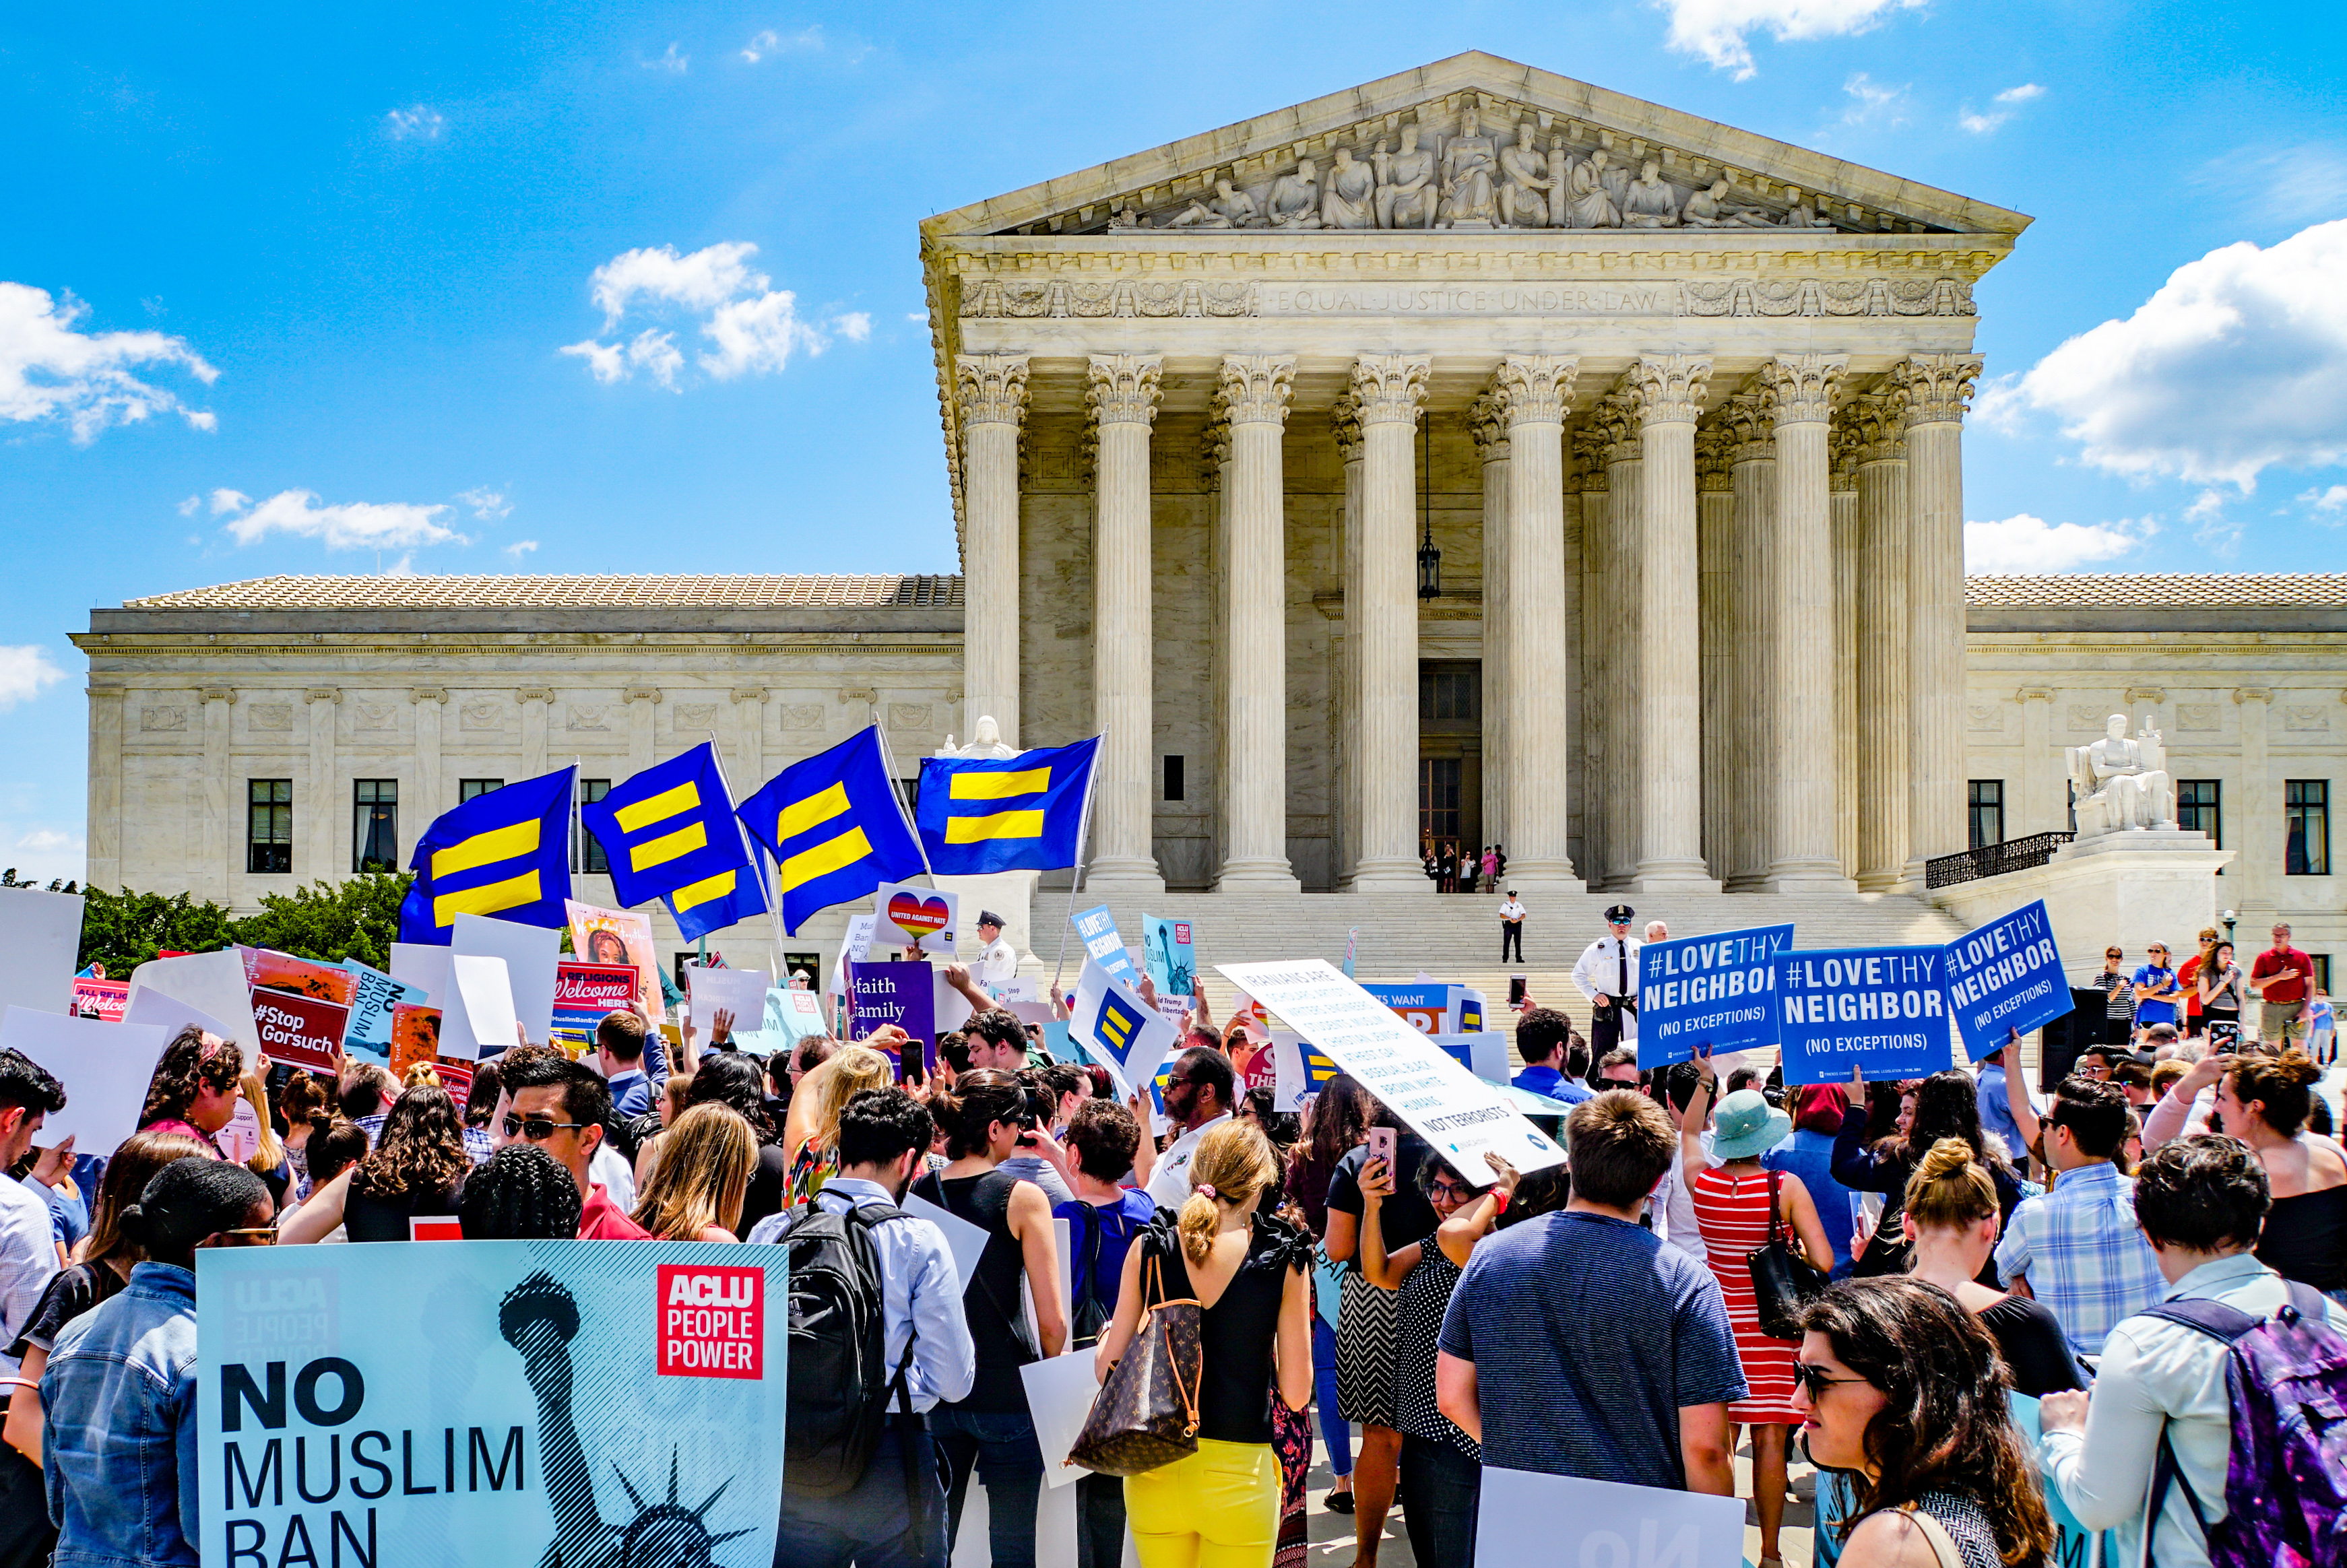 People protesting in front of the Supreme Court. Photo courtesy of Ted Eytan, Flickr.